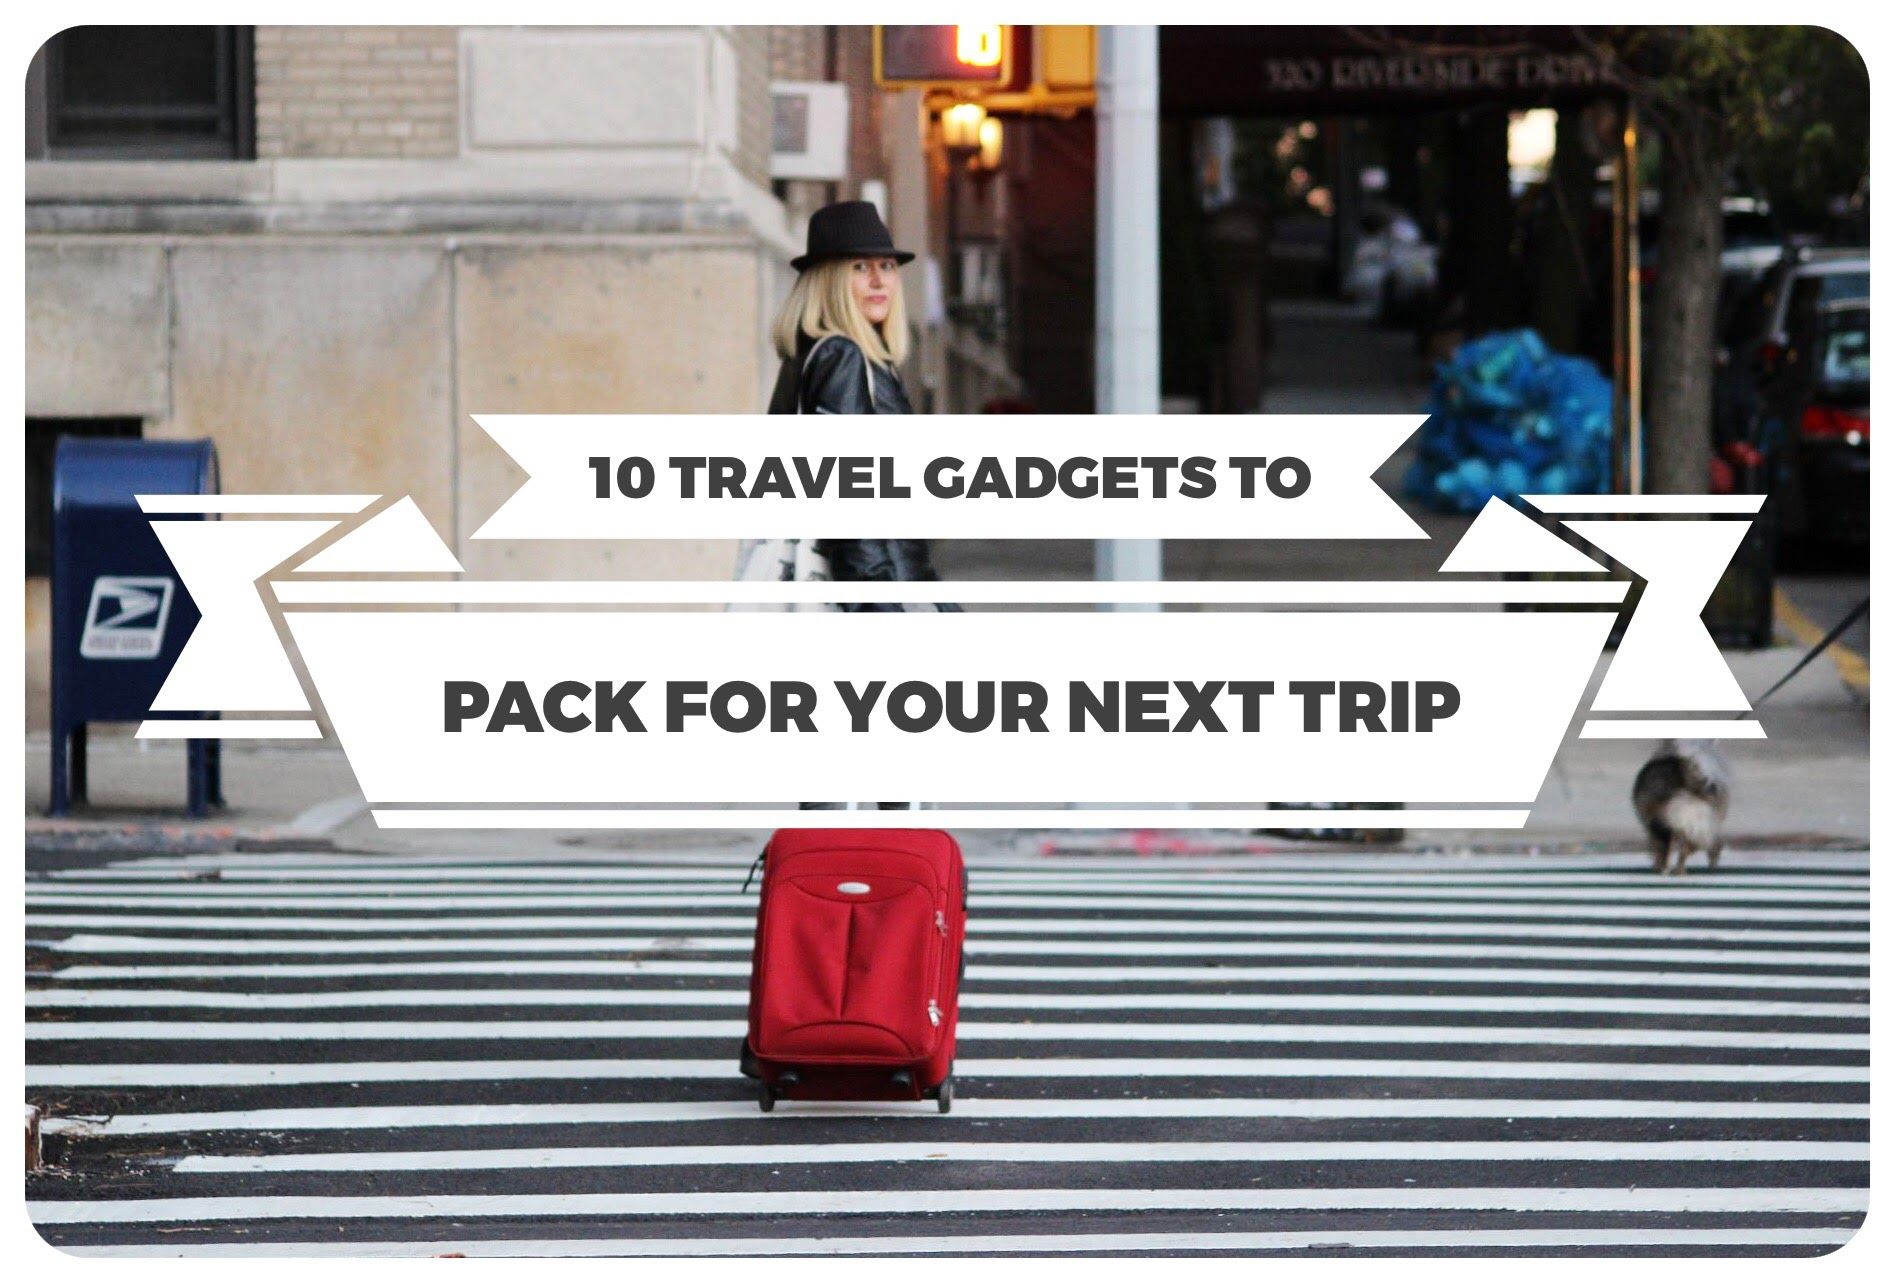 Top Compact Travel Gadgets That Can Bring Your Trip To The Next Level